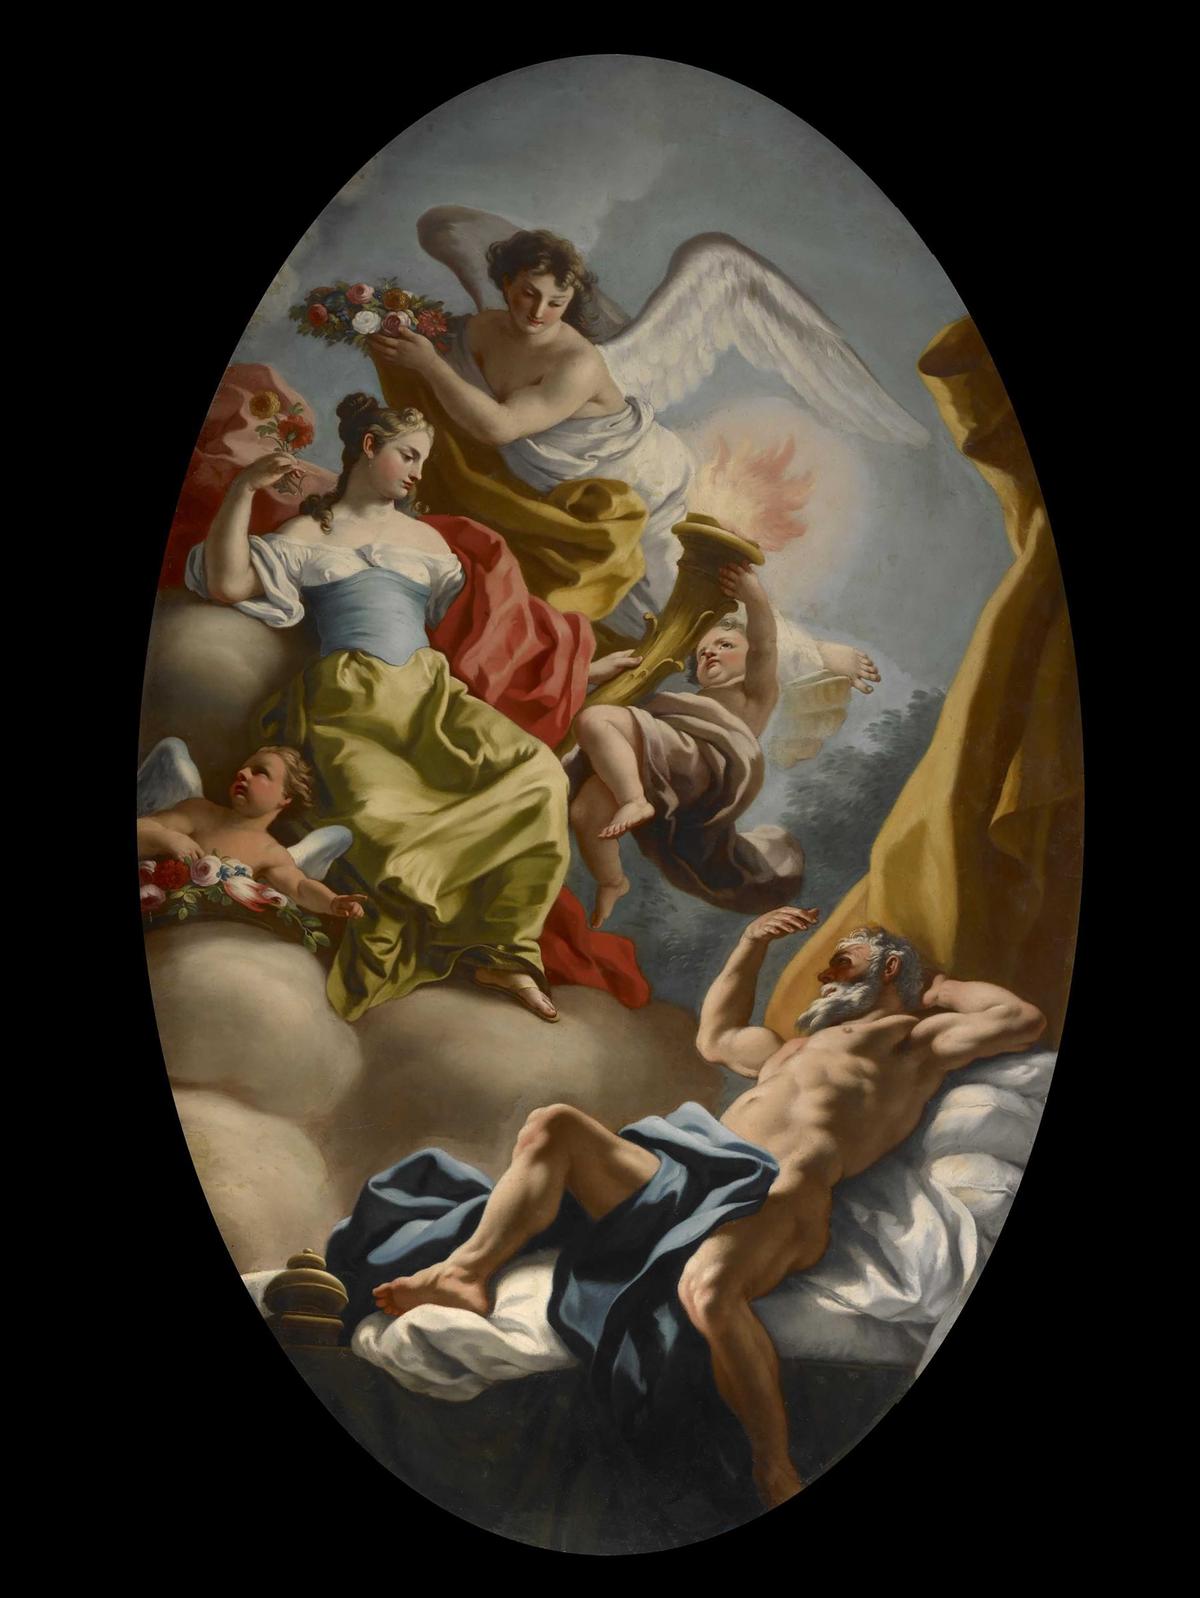 The personification of wisdom and truth shines light into the shadows of man in the painting "Allegory of Wisdom and Truth," circa 1750, from the workshop of Francesco de Mura. Oil on canvas. Museum of Fine Arts, Houston. (Public Domain)